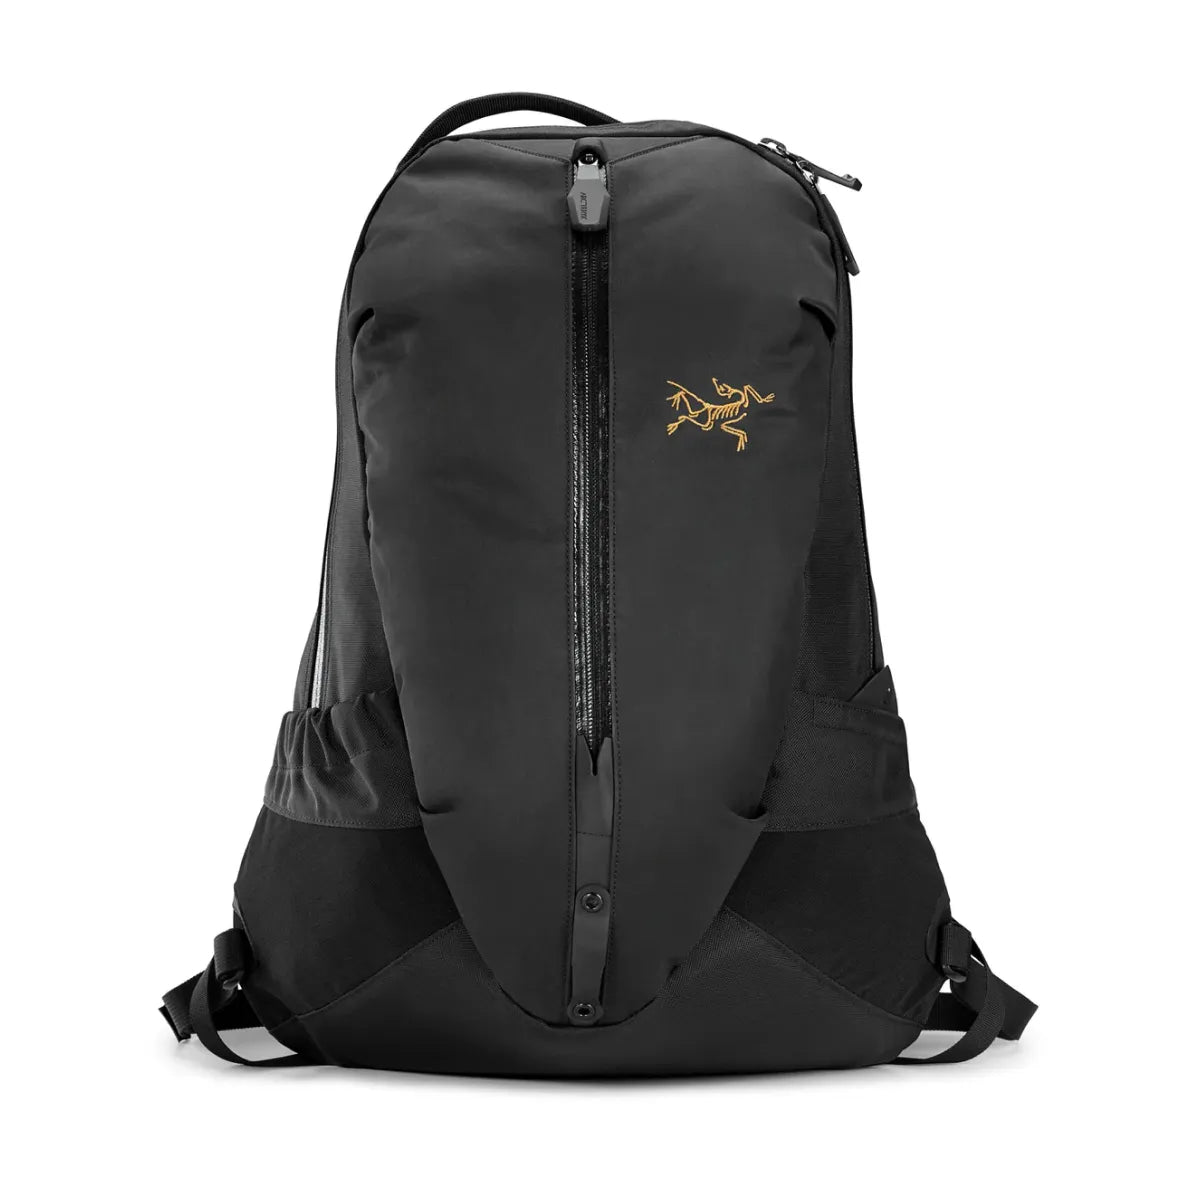 Arro 16 Backpack - ARC'TERYX(アークテリクス) | iGATE IKEUCHI EXIT online store